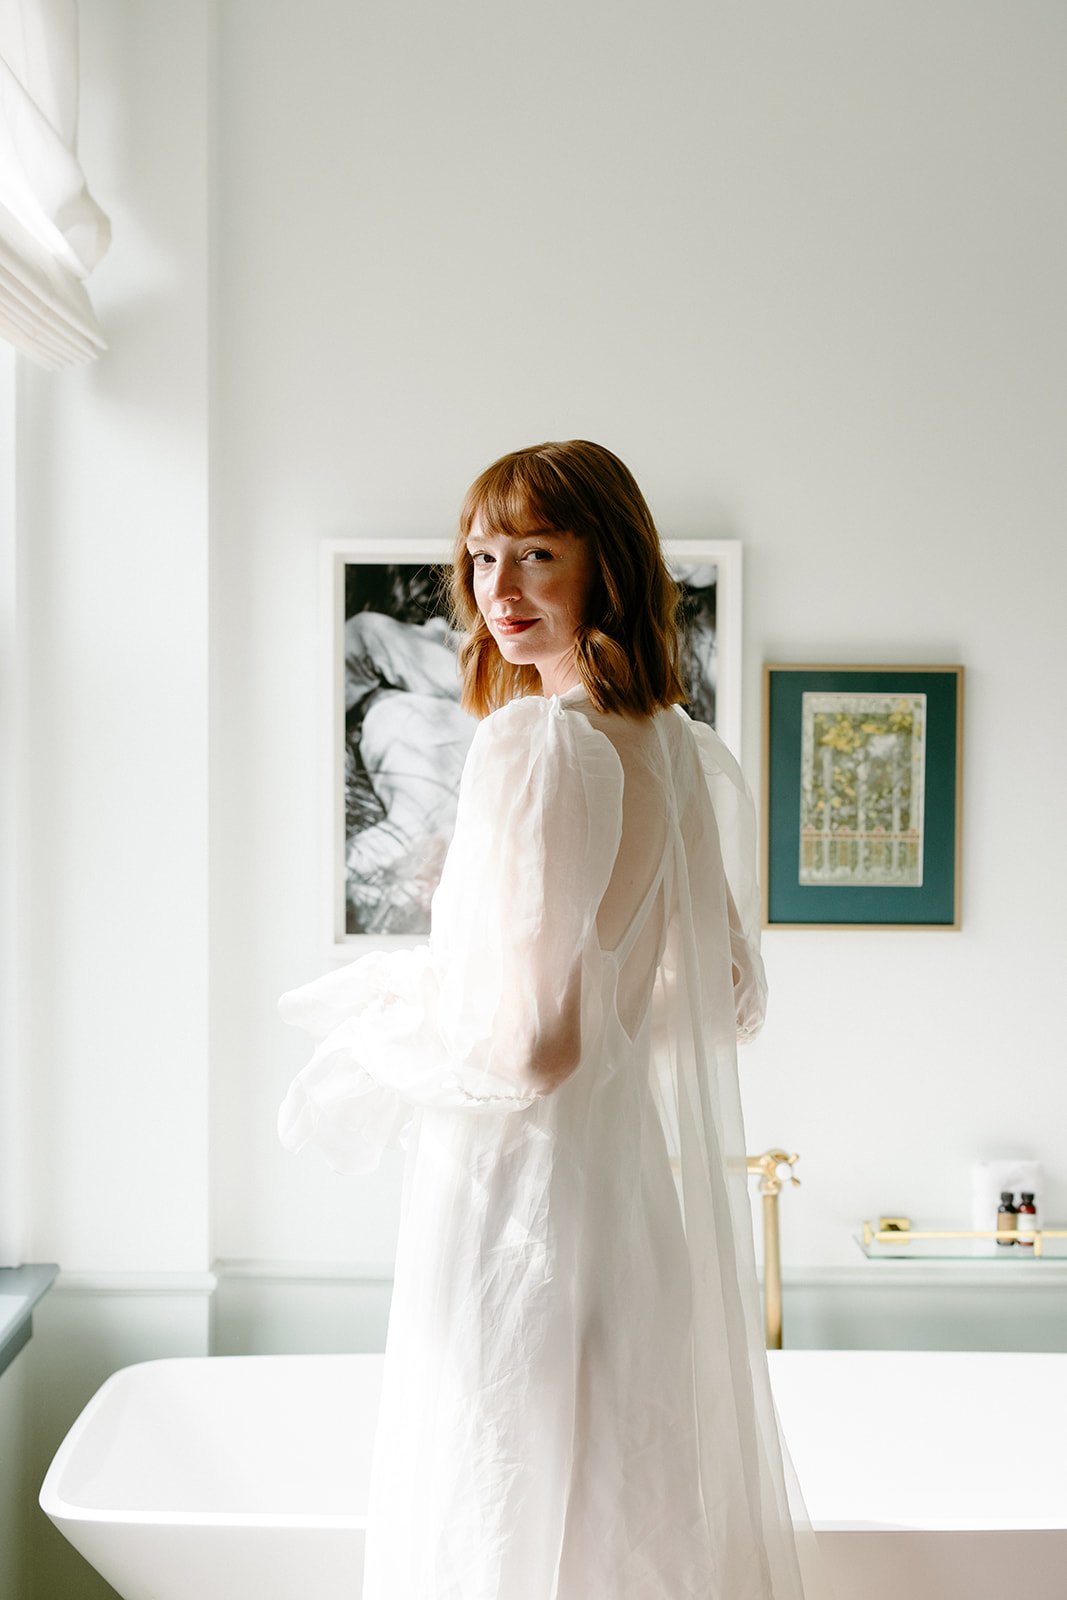 los angeles hair and makeup team style bride for her elopement in DTLA